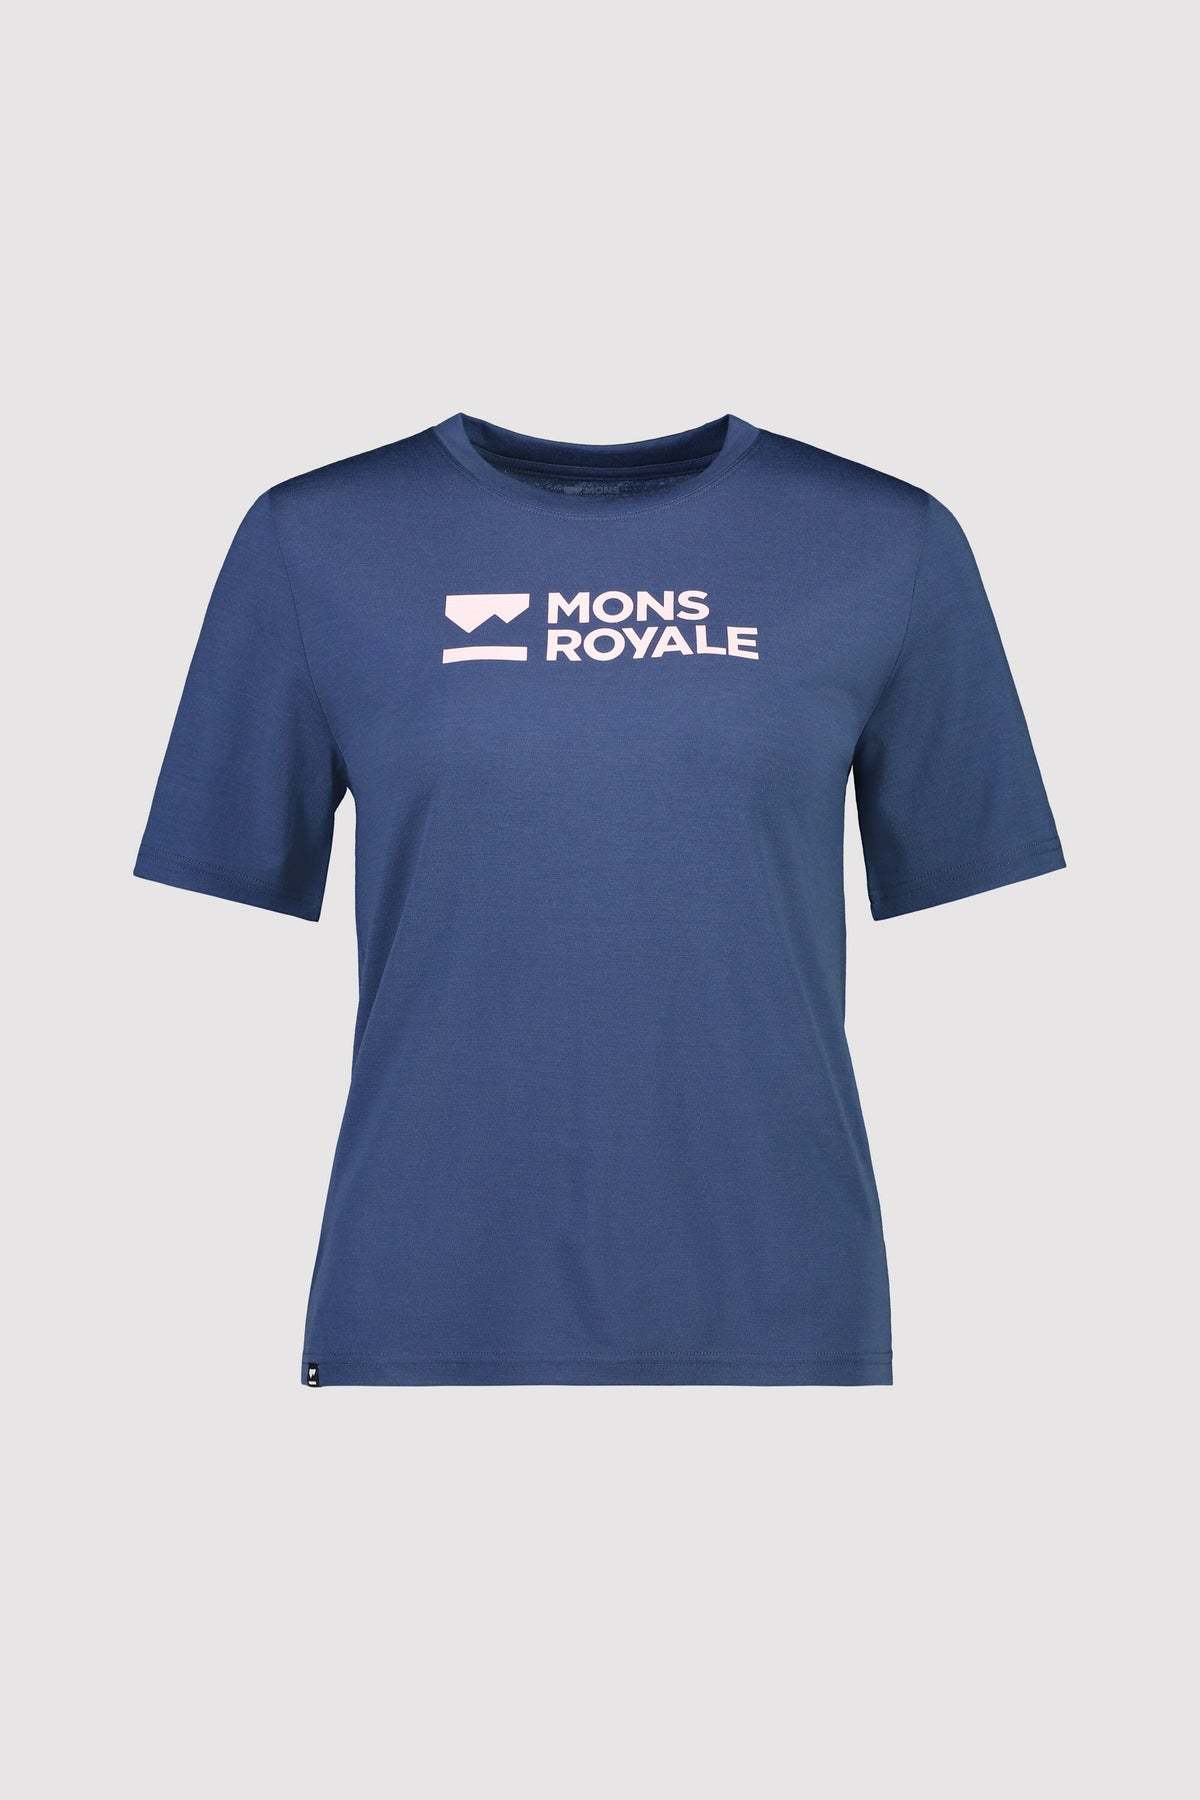 Mons Royale Icon Relaxed Tee Women's T-shirt - Äkäslompolo